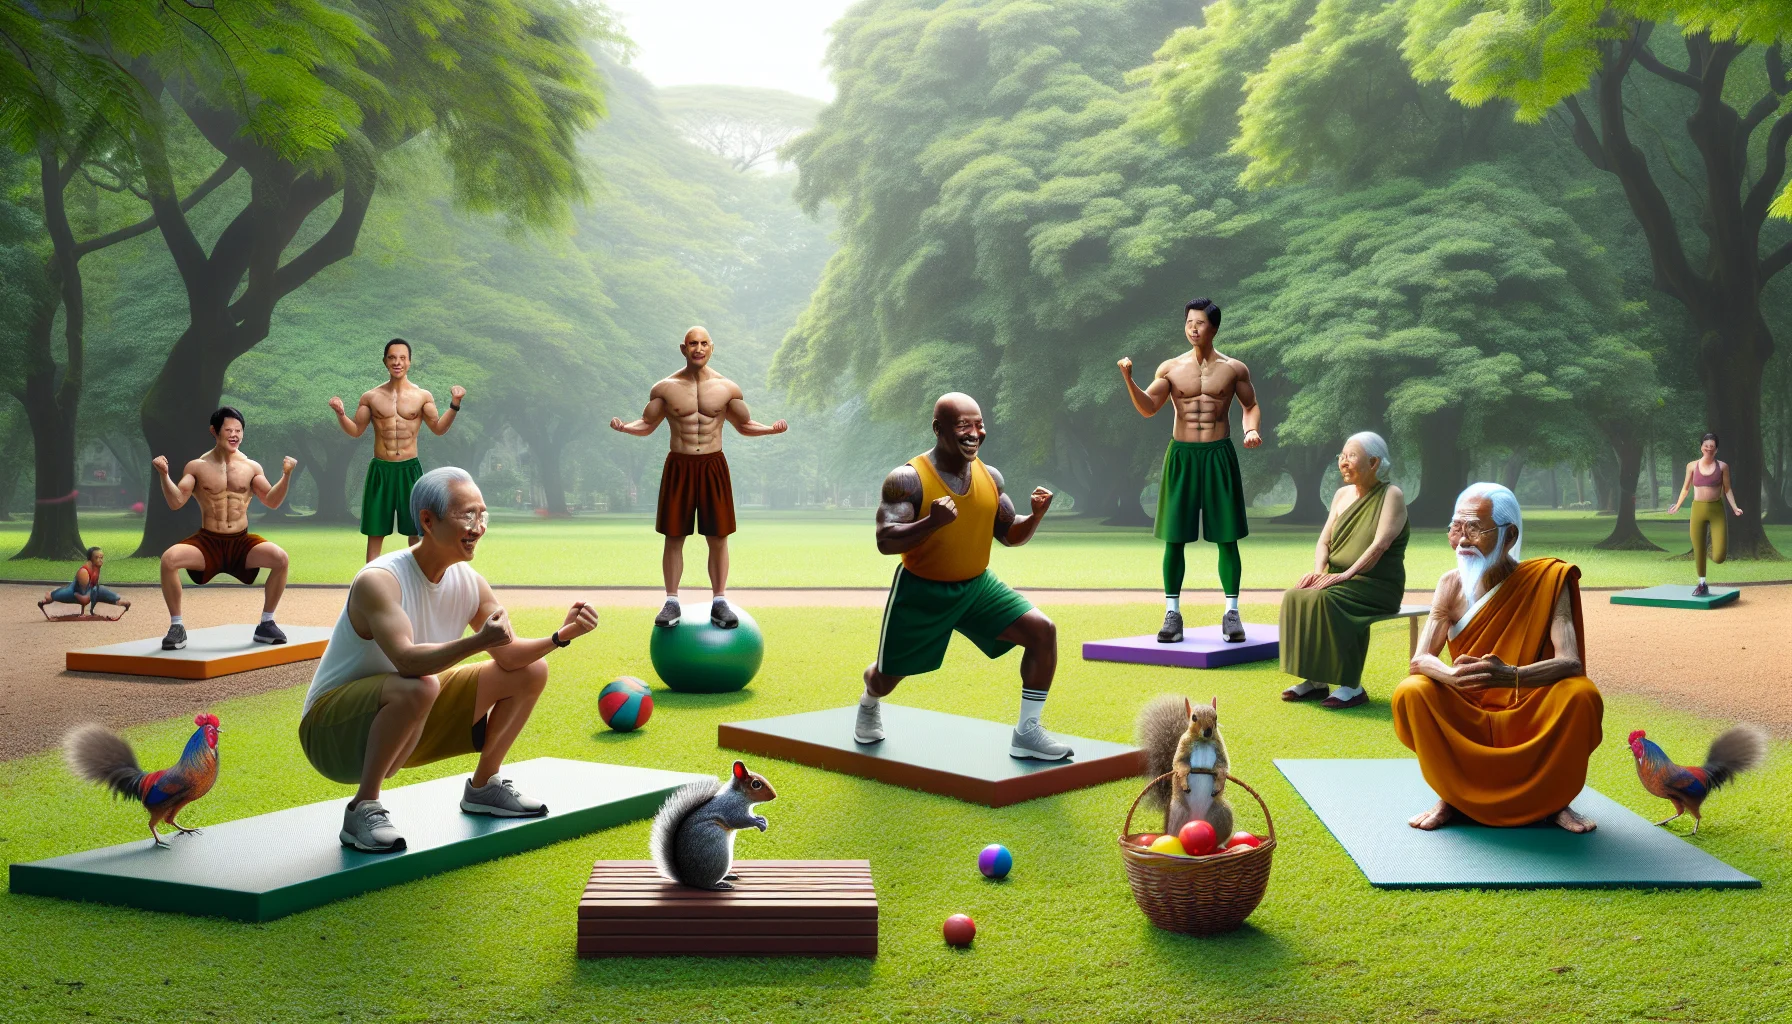 Create a realistically detailed image showcasing a humorous scenario that encourages people to partake in abdominal calisthenics workouts. The scene may include a diverse group of individuals. Imagine a muscular South Asian woman, an elderly Black man, and a mid-aged Caucasian male performing a sequence of core exercises in a lush, open park space. Add an unexpected element of fun to the scene, such as a squirrel attempting to mimic the group's exercises or a clown offering them balancing balls. The aim of the image should be to promote physical fitness in a way that is lighthearted and appealing to people of all backgrounds.